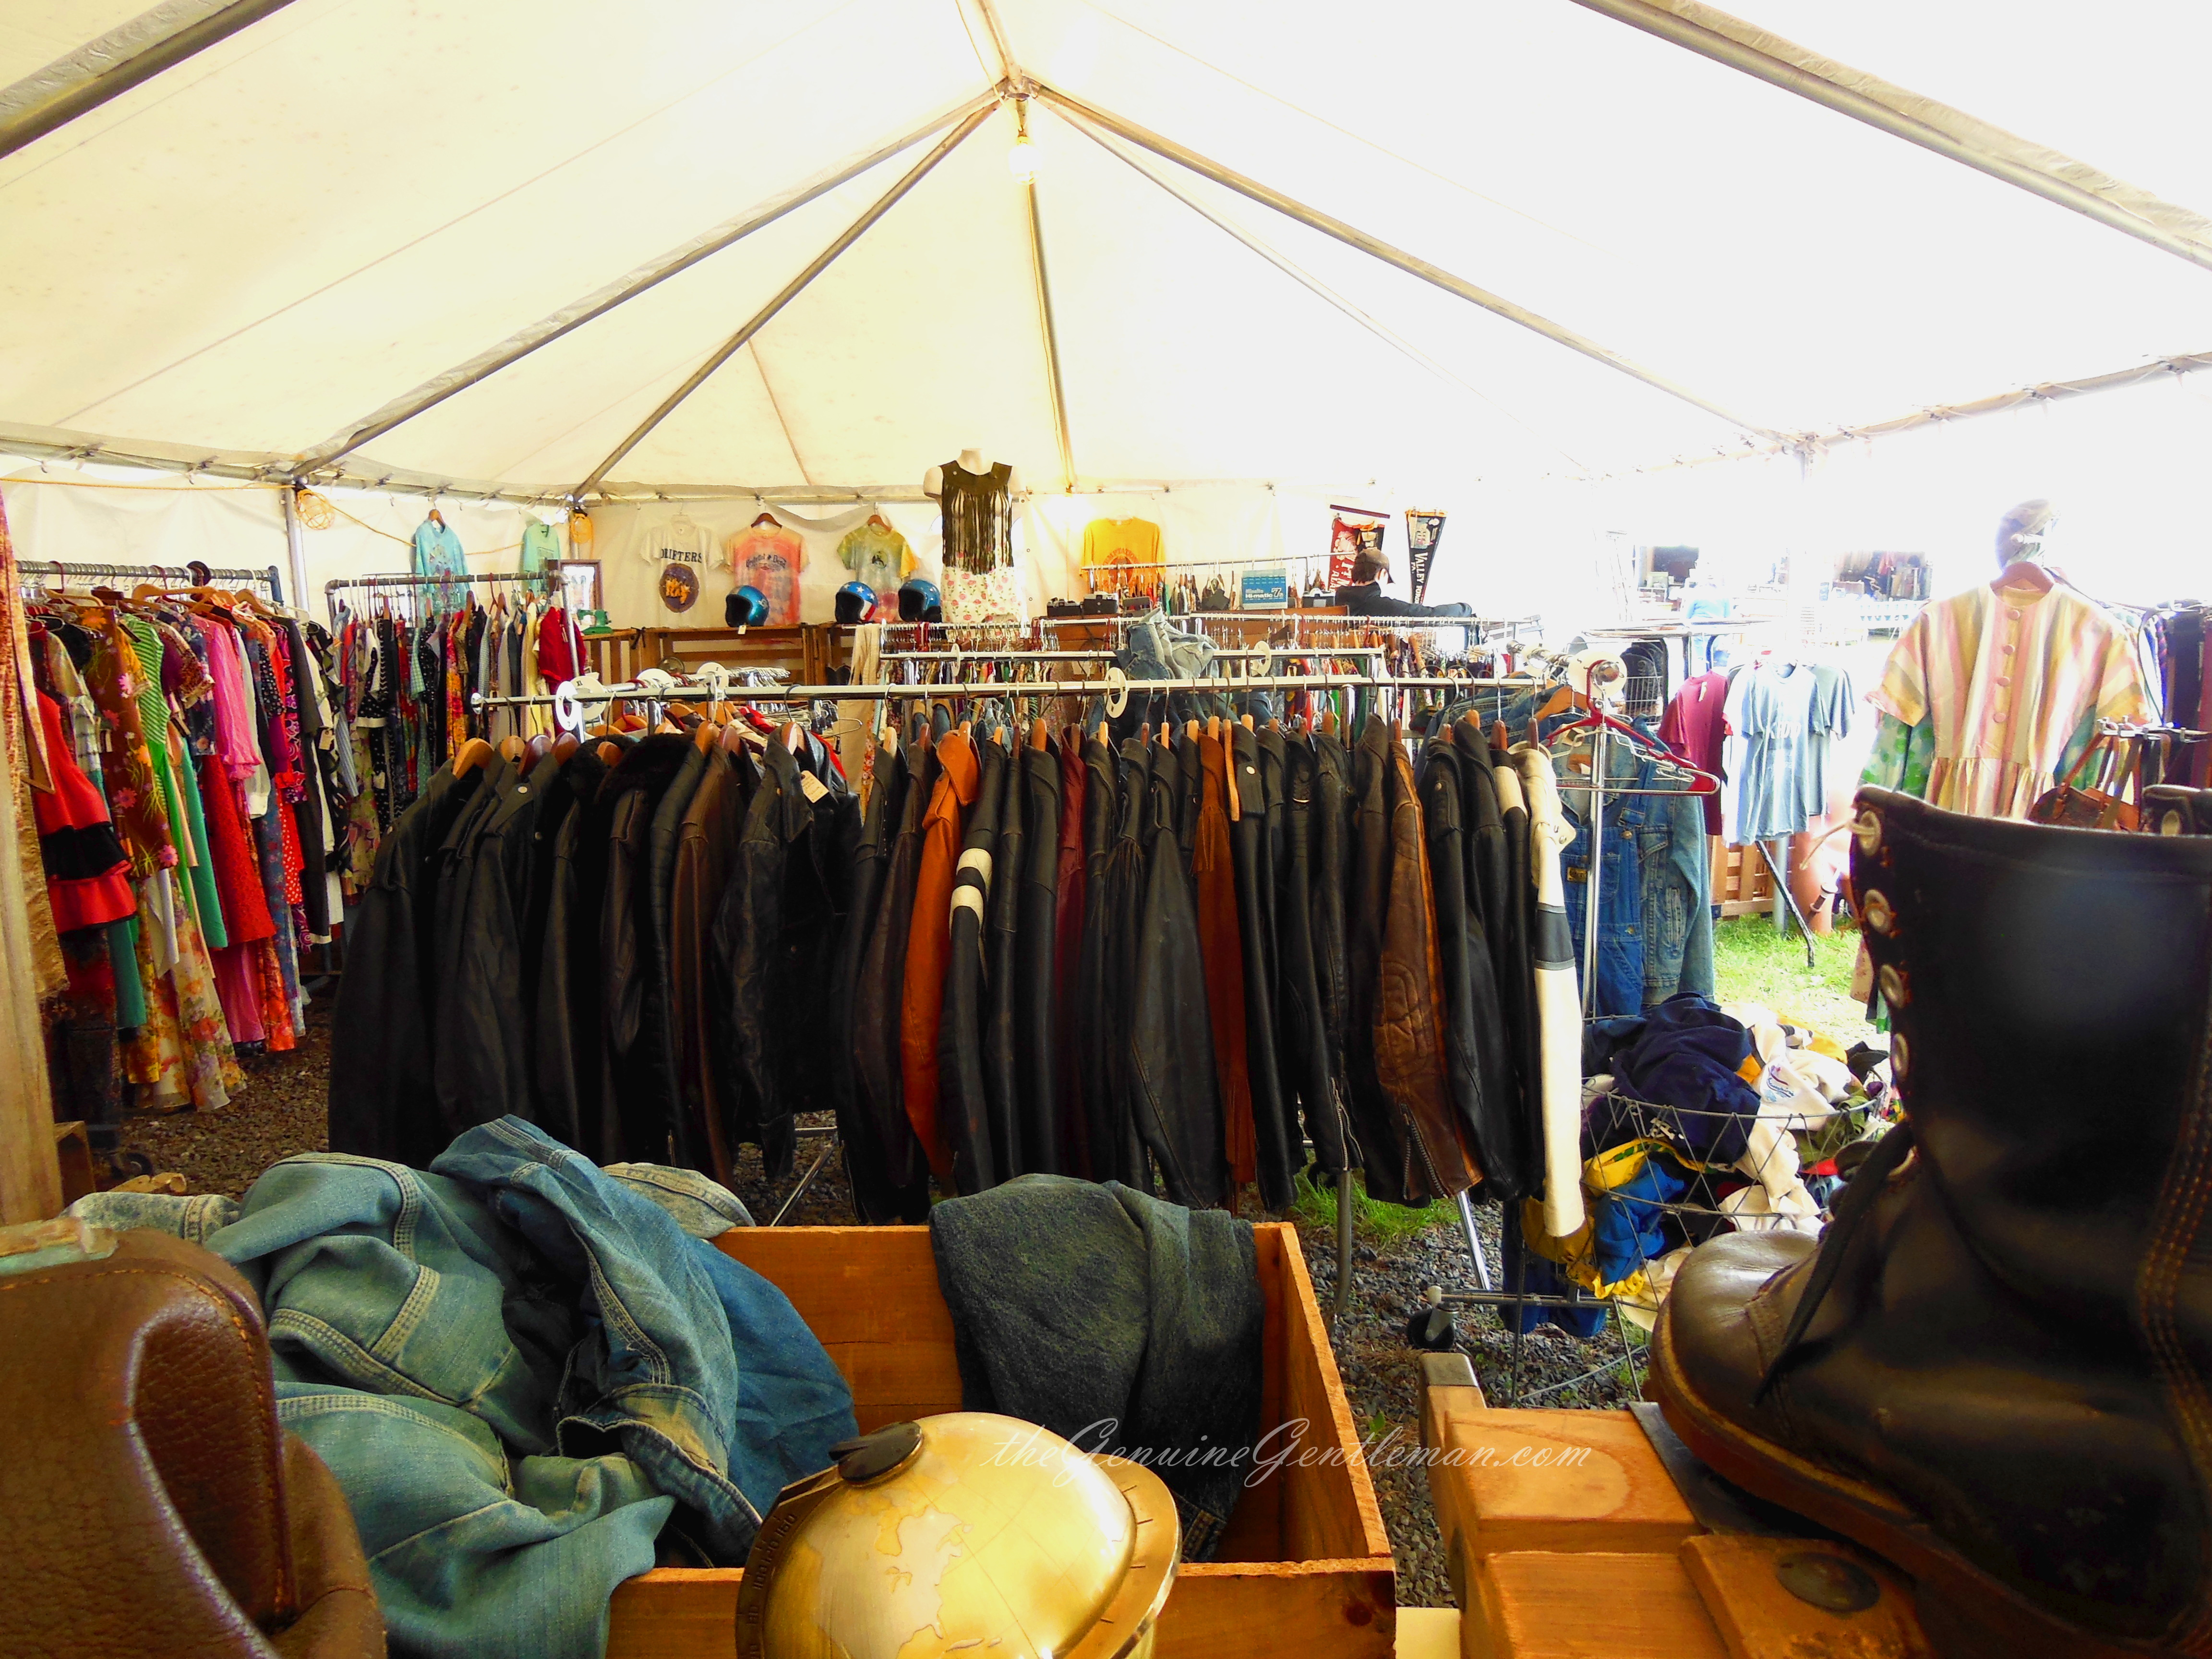 Brimfield Antique Show Vendor Rack with Leather Jackets